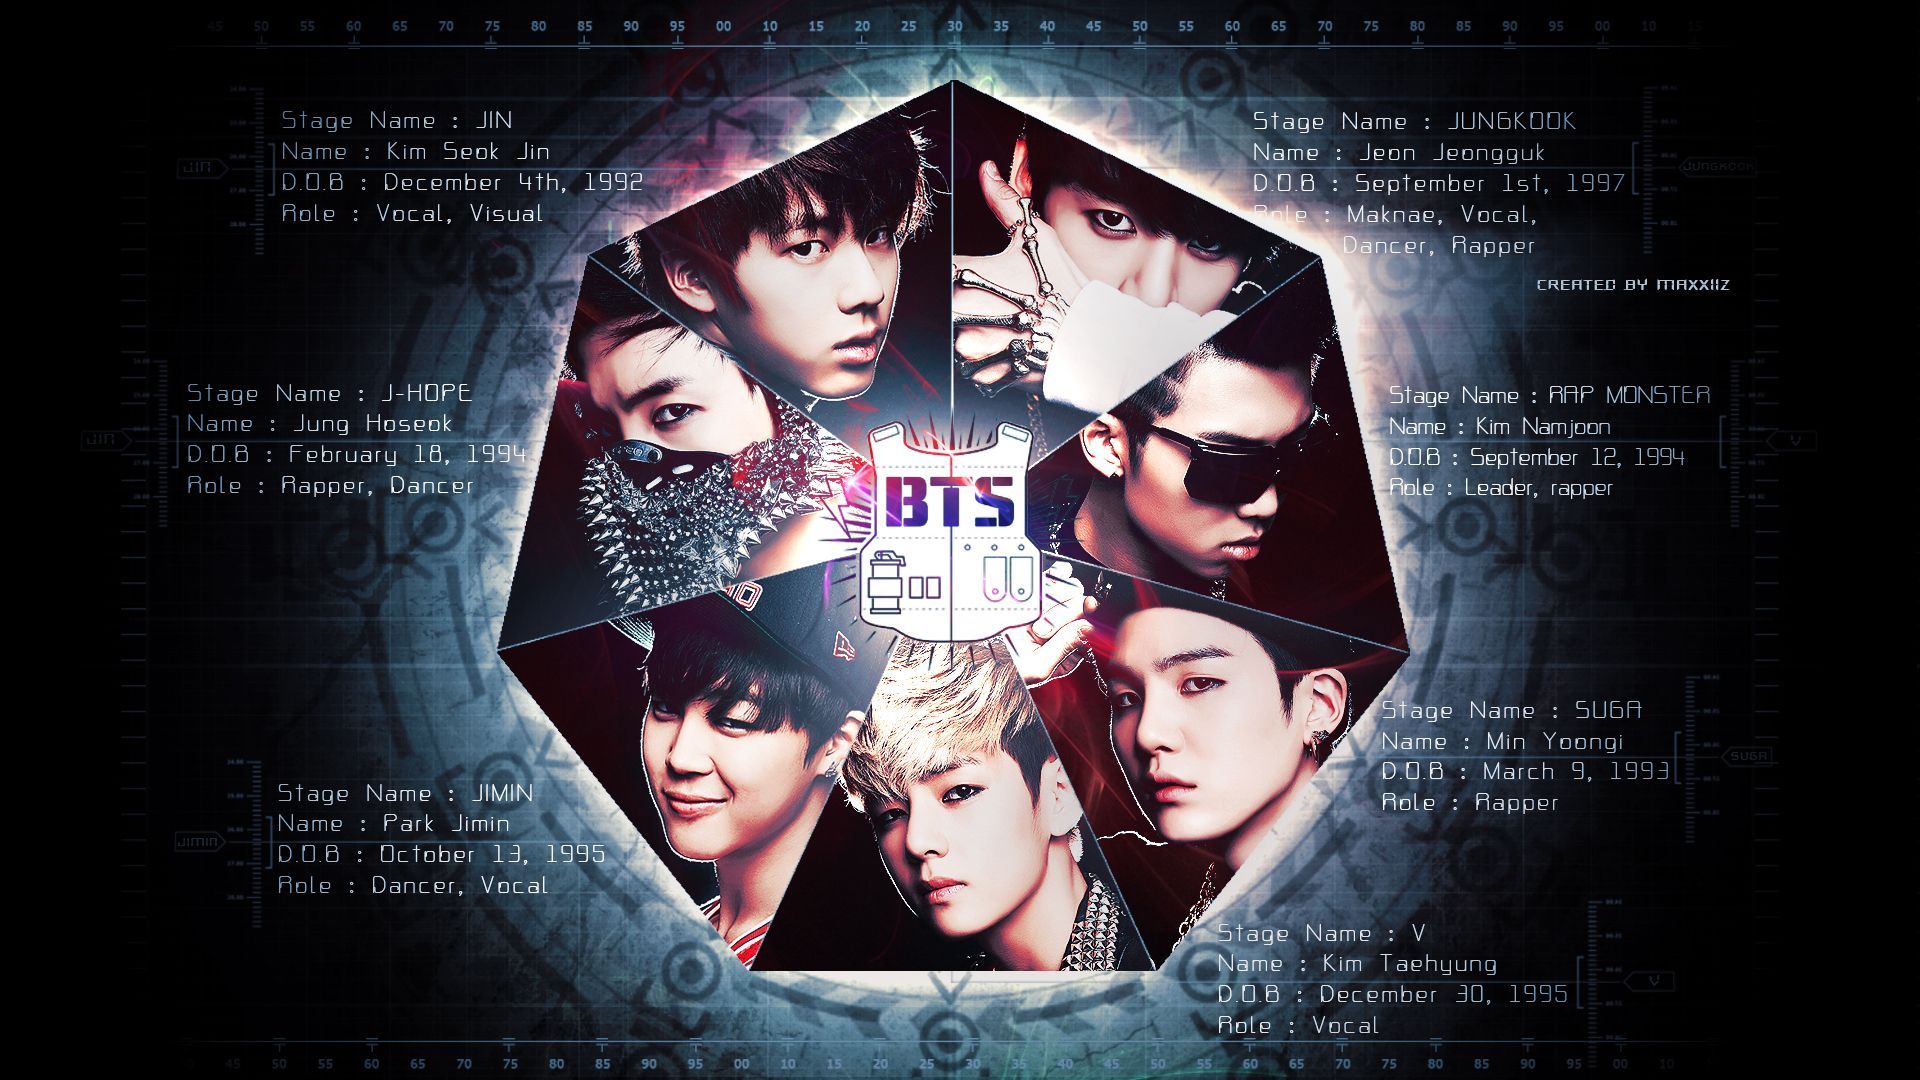 Bts members with logo HD wallpapers | Pxfuel